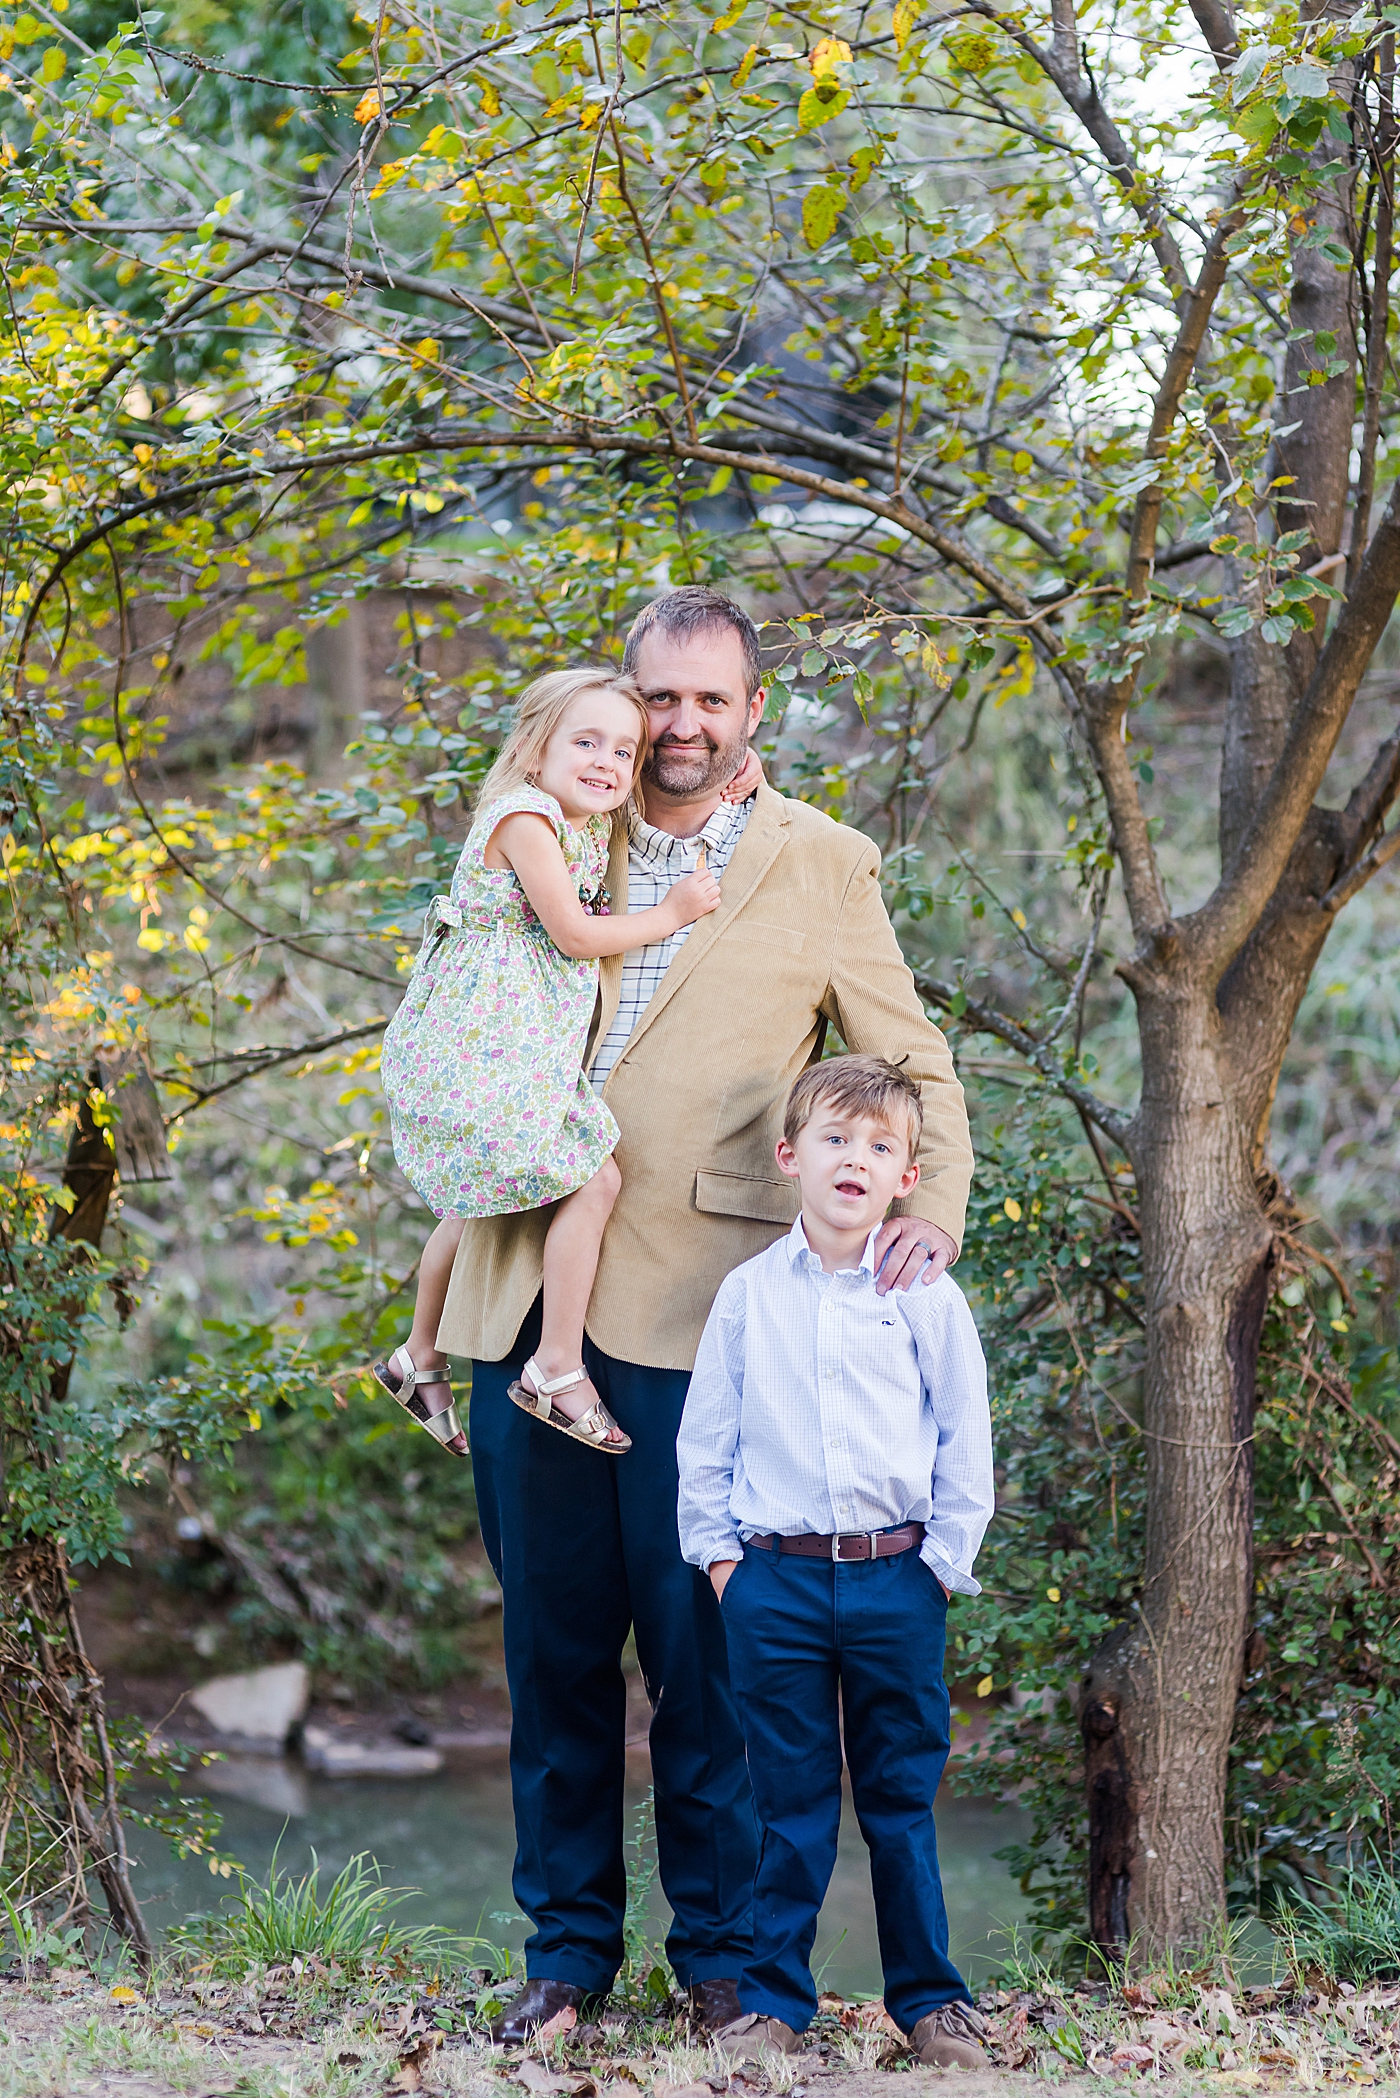 Dad with his little ones in the park | Photo by Charlotte Family Photographer Anna Wisjo